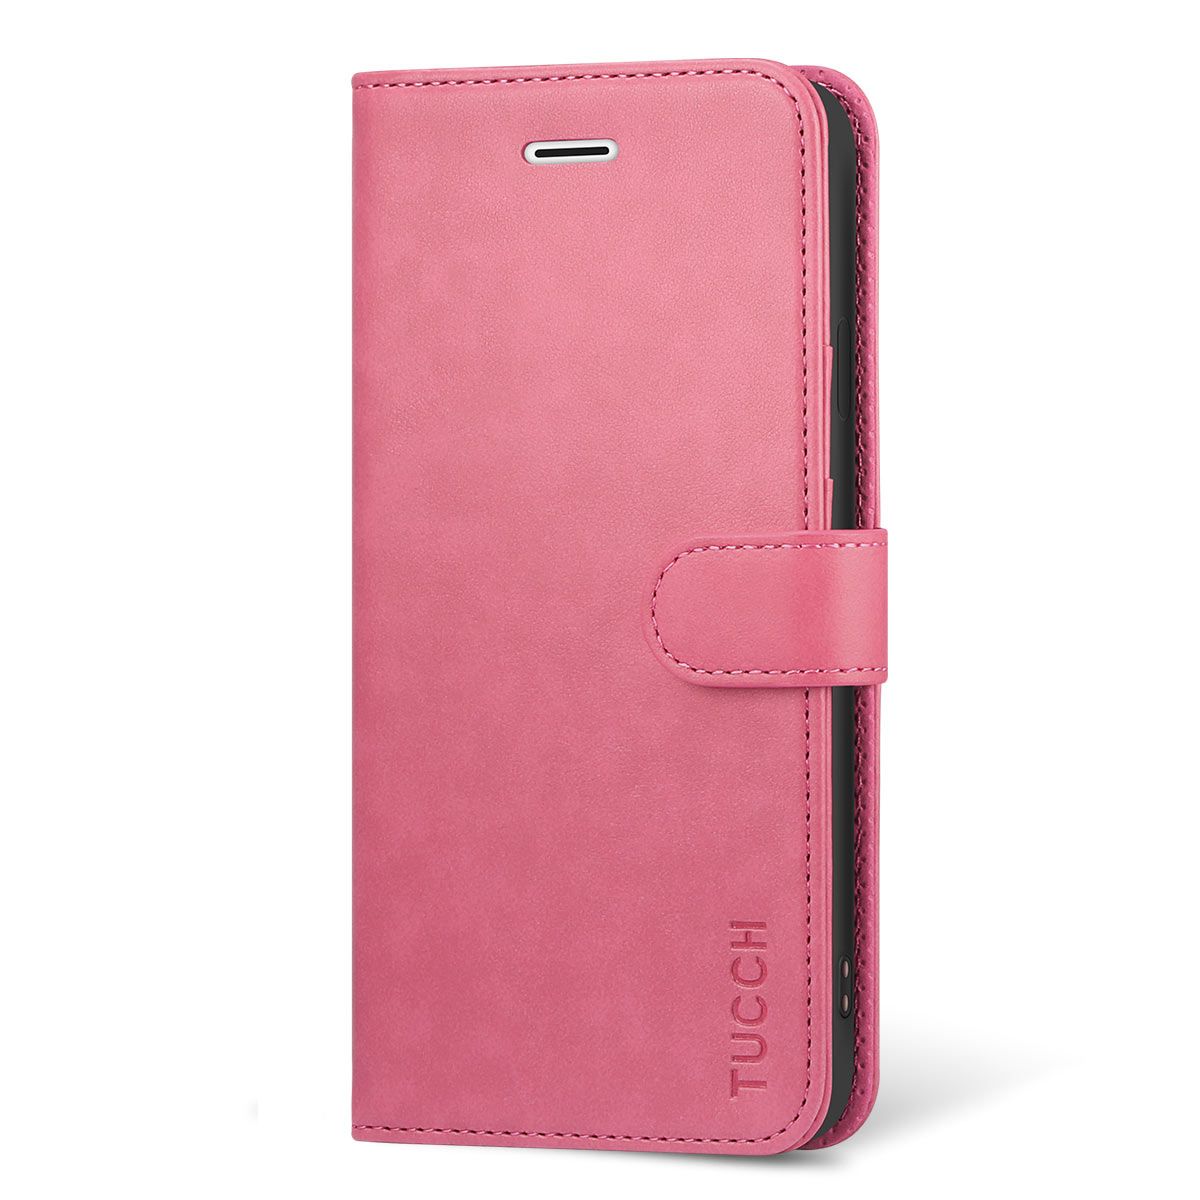 TUCCH 6s/6 Case, Stand Holder Magnetic Closure, Flip Folio Wallet Case